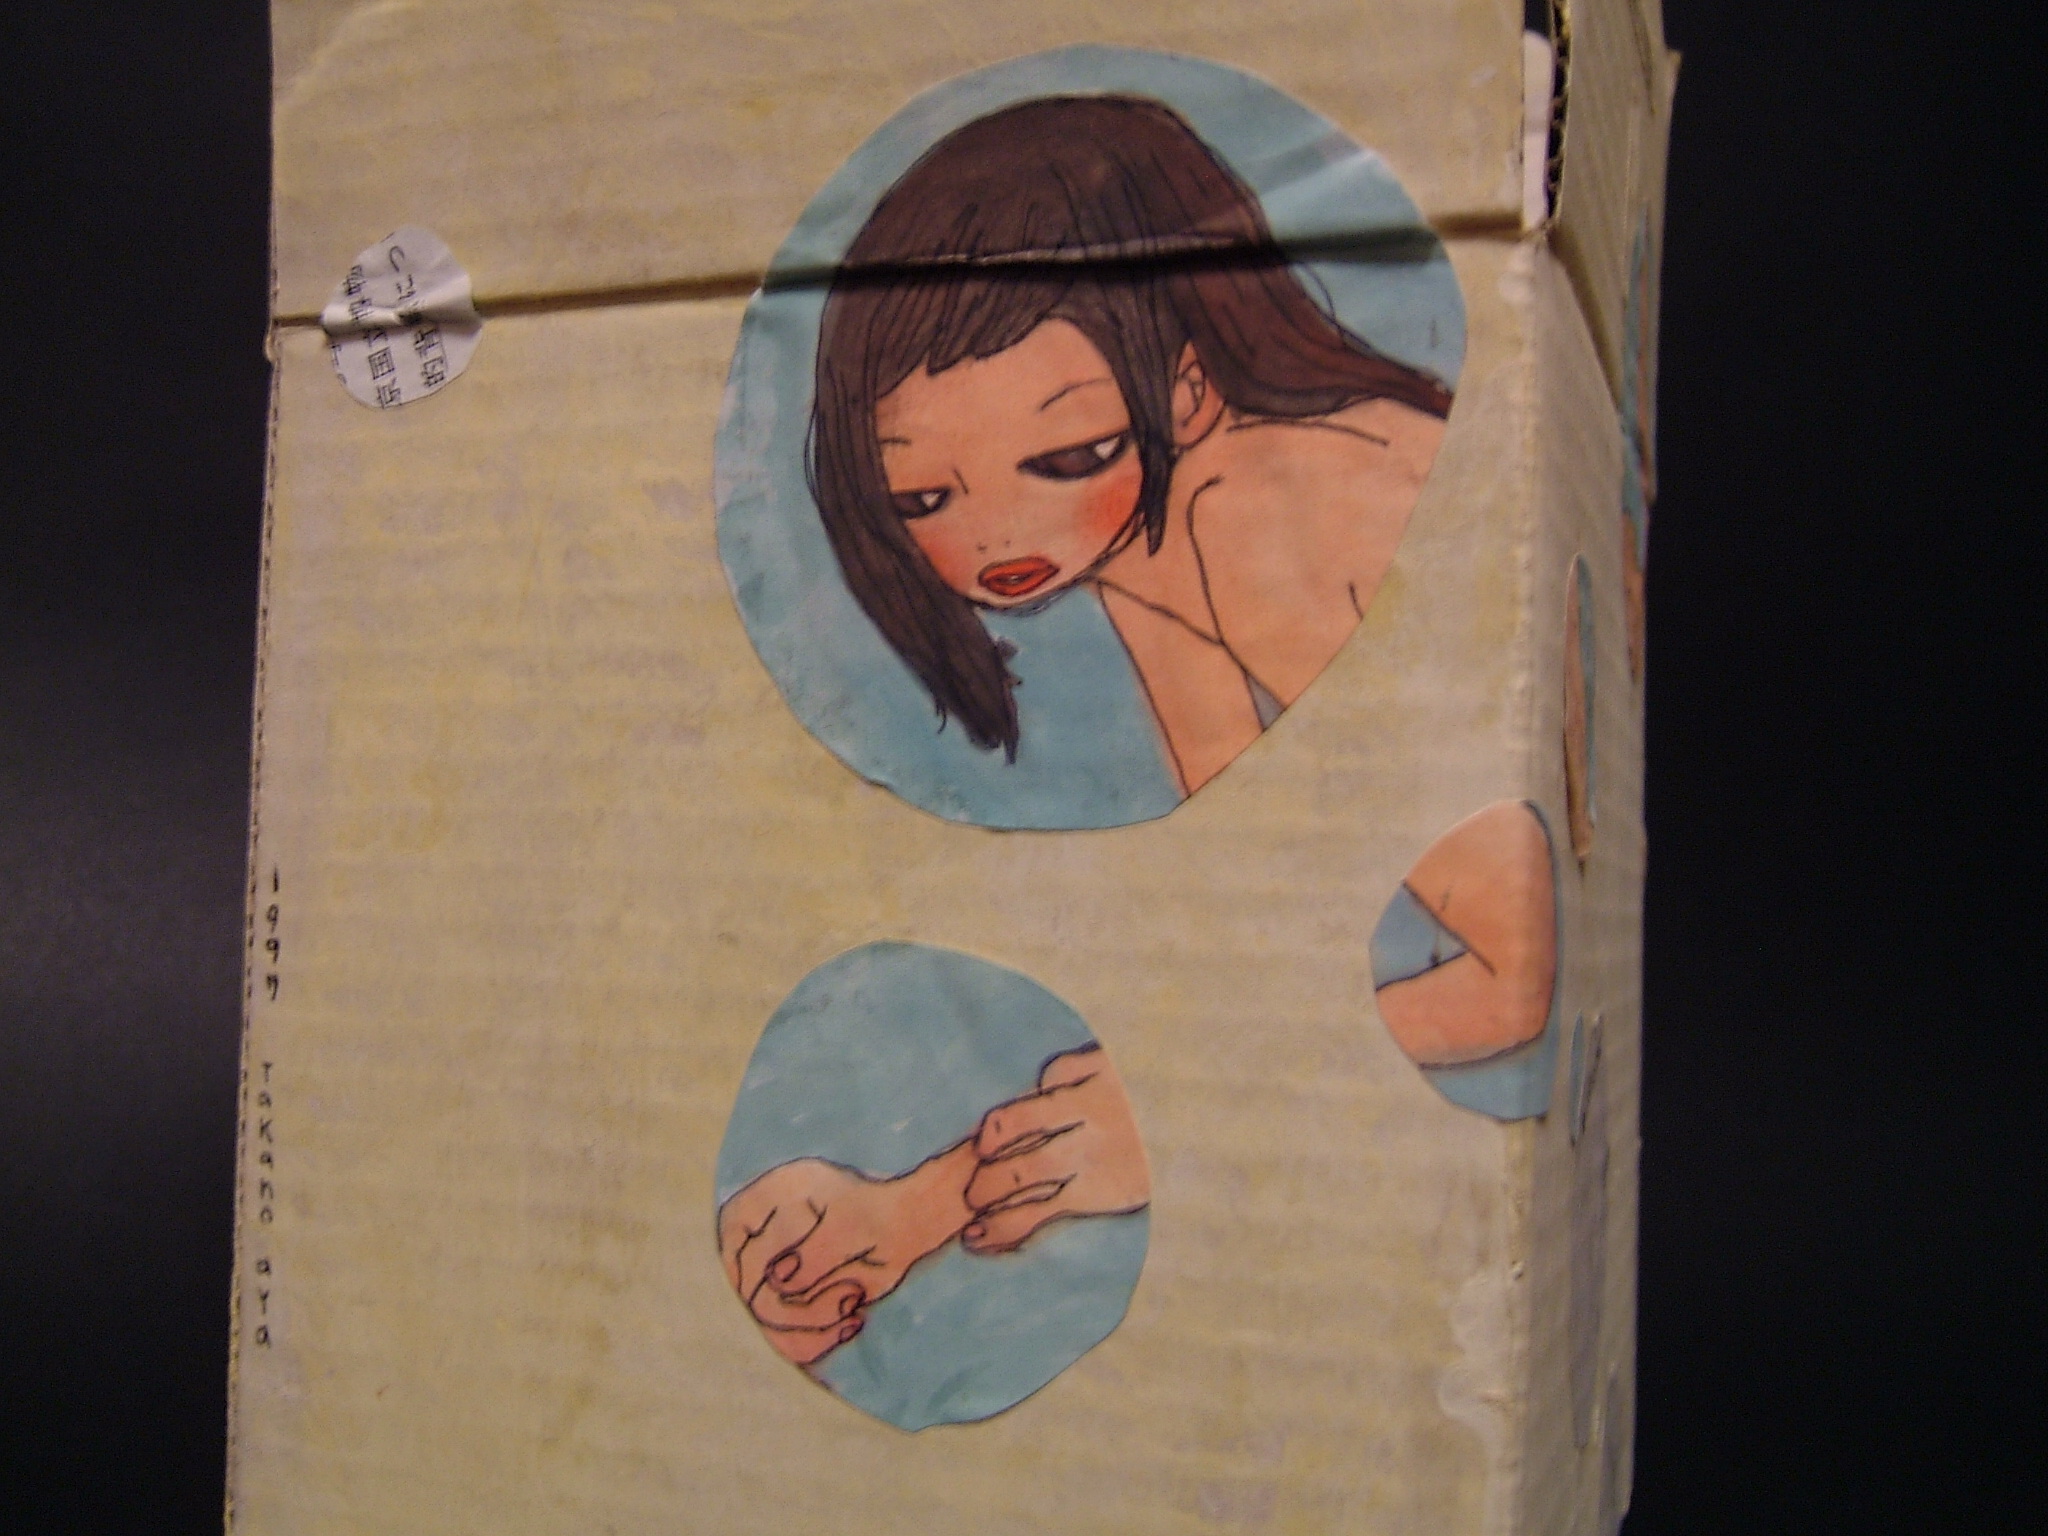  "Naked Box" &nbsp;(1997)  Painting/ Collage on cardboard  8.7 x 6.2 x 5.7 in 